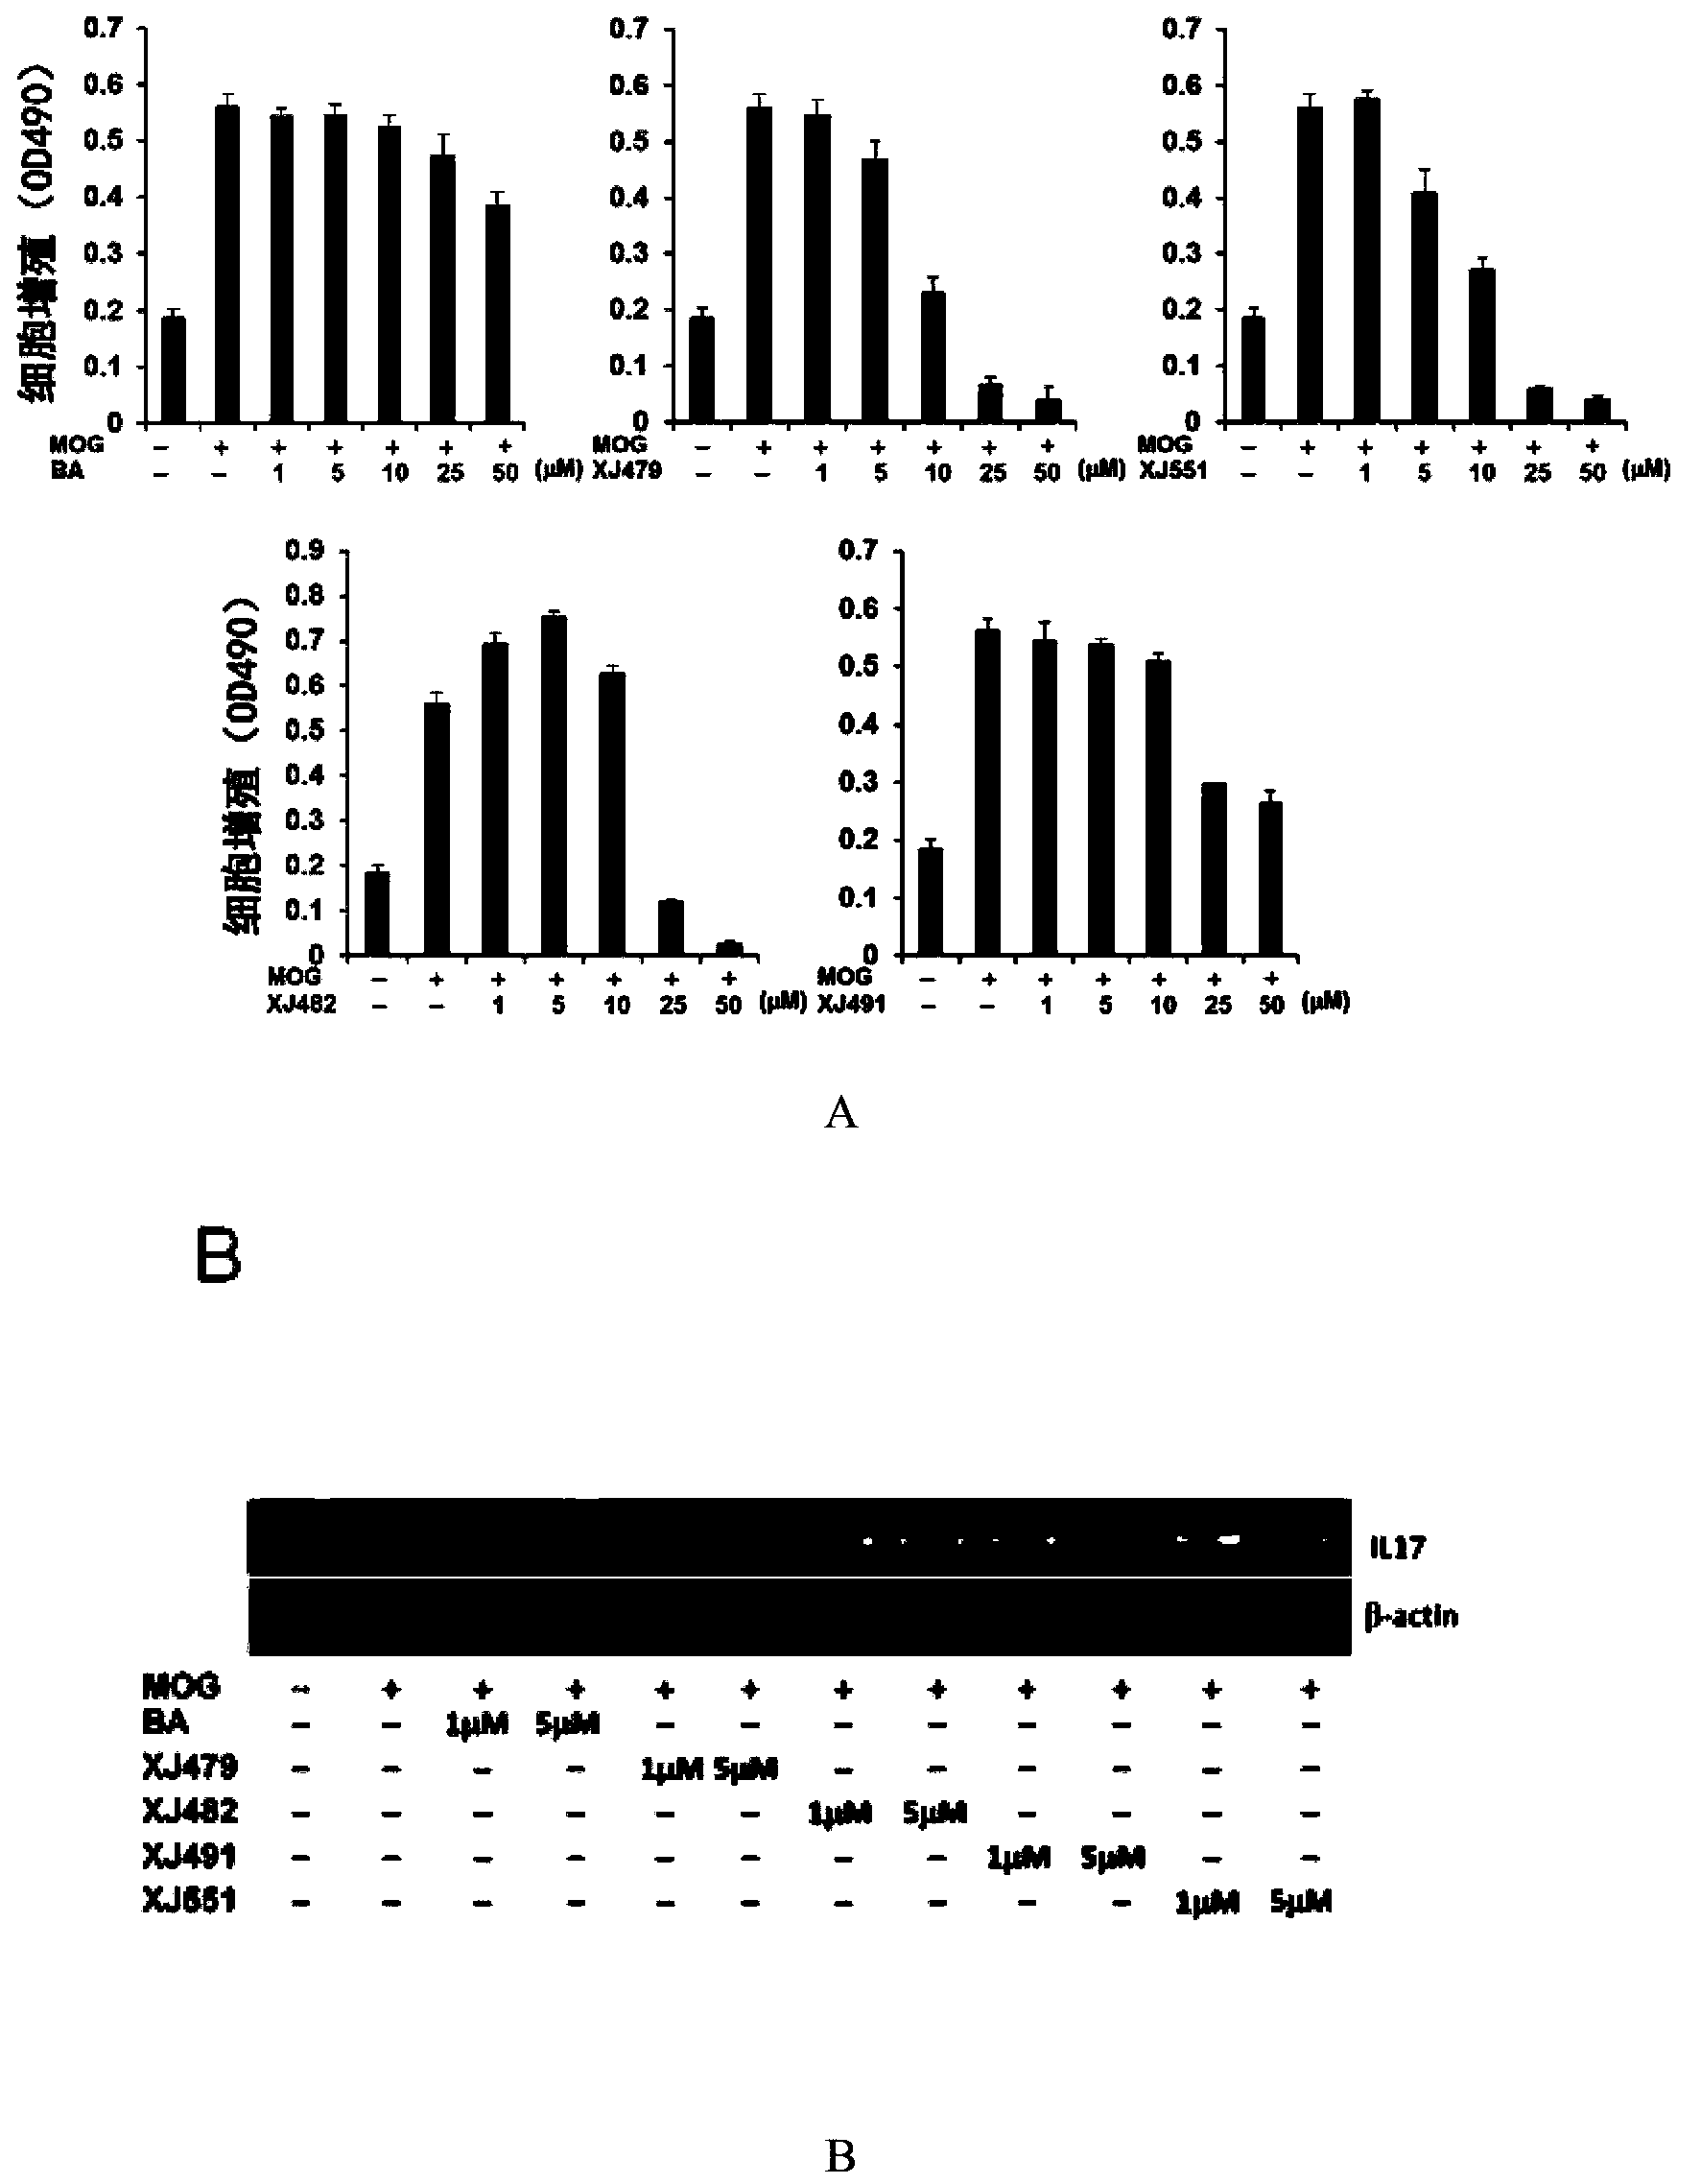 Application of betulinic acid derivatives in preparation of drugs inhibiting T cell differentiation